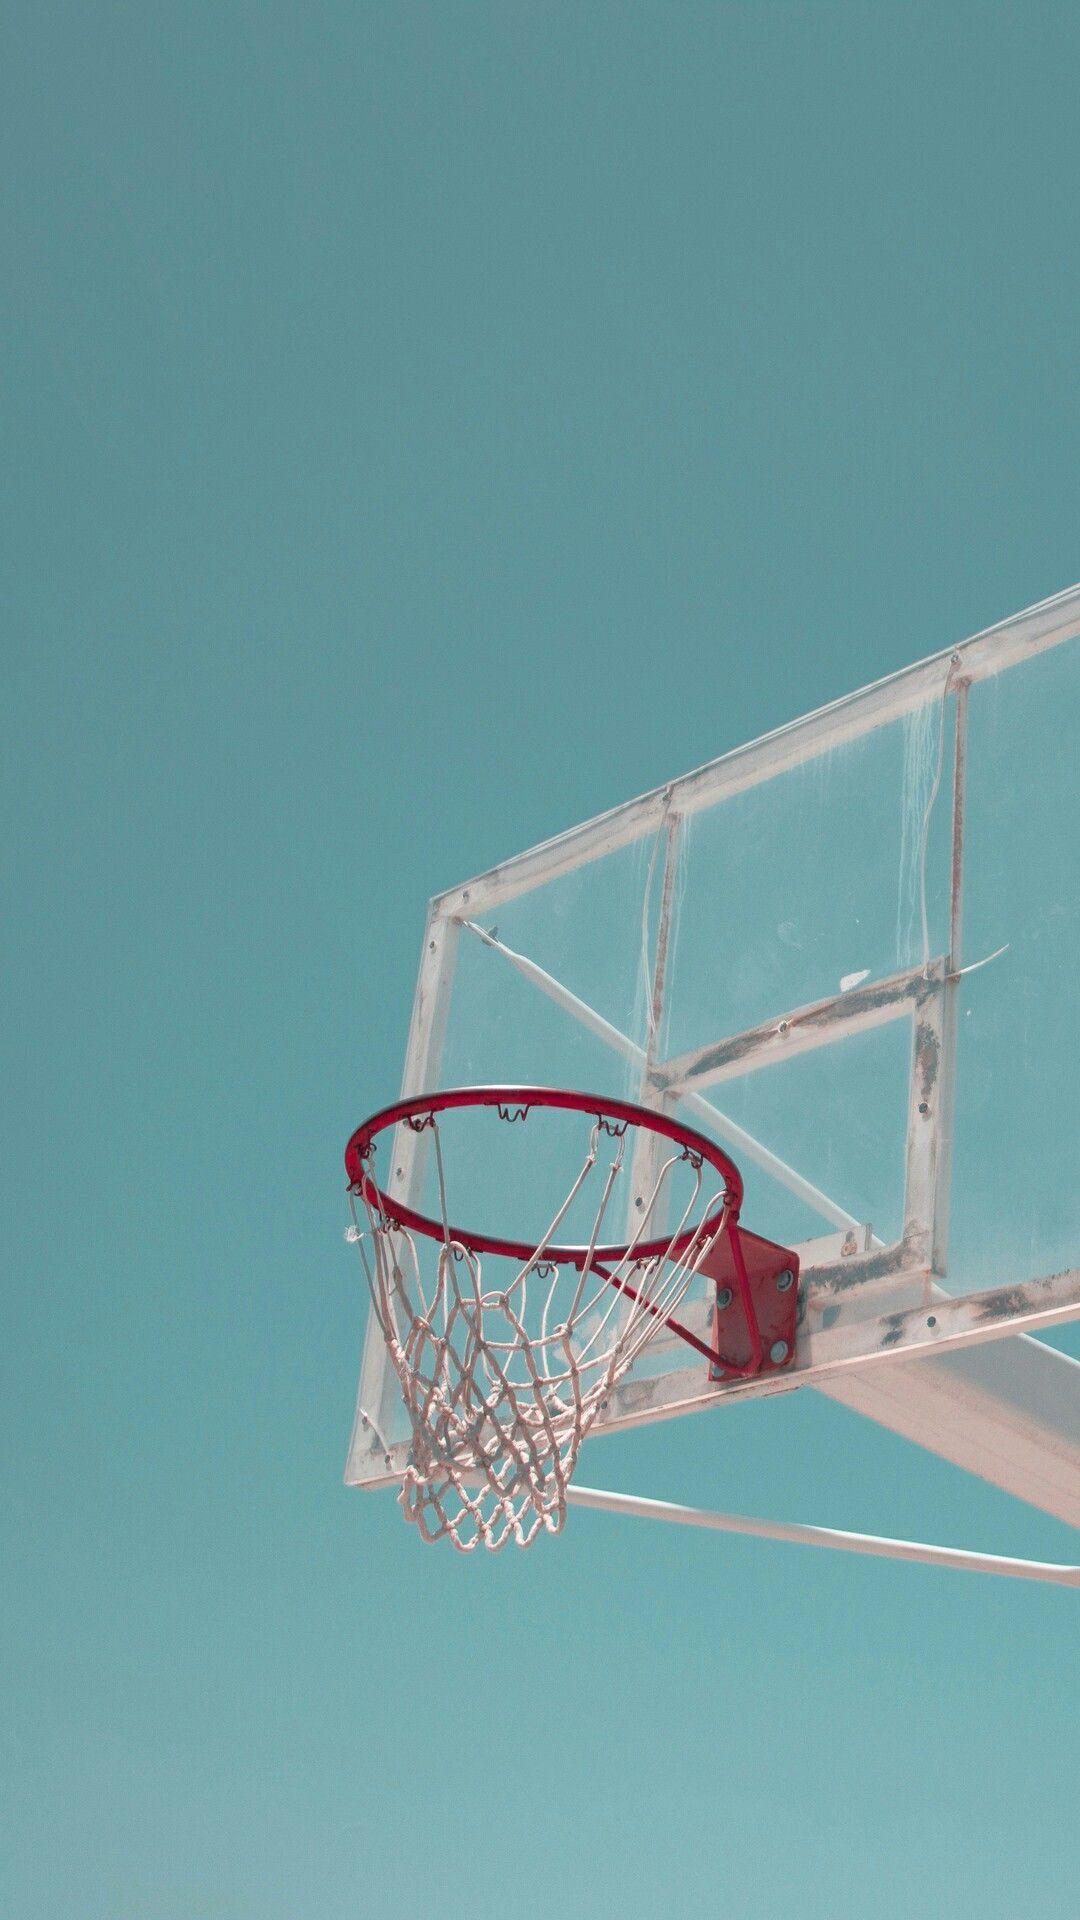 Girl Basketball Pictures  Download Free Images on Unsplash